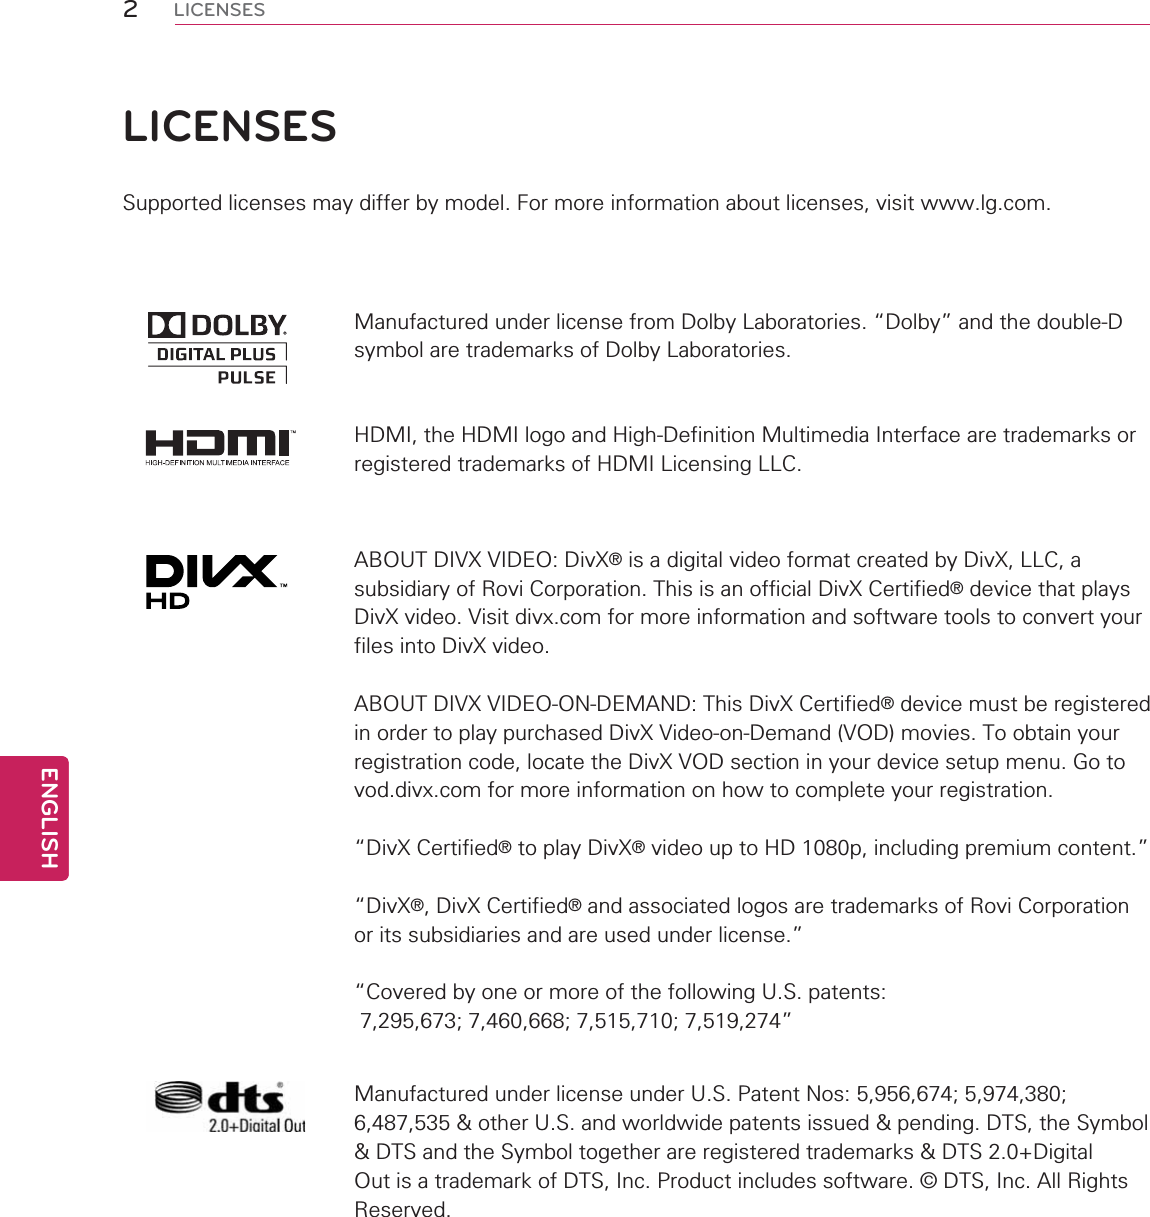 2ENGENGLISHLICENSESLICENSESSupported licenses may differ by model. For more information about licenses, visit www.lg.com.Manufactured under license from Dolby Laboratories. “Dolby” and the double-D symbol are trademarks of Dolby Laboratories.HDMI, the HDMI logo and High-Definition Multimedia Interface are trademarks or registered trademarks of HDMI Licensing LLC.ABOUT DIVX VIDEO: DivX® is a digital video format created by DivX, LLC, a subsidiary of Rovi Corporation. This is an official DivX Certified® device that plays DivX video. Visit divx.com for more information and software tools to convert your files into DivX video.ABOUT DIVX VIDEO-ON-DEMAND: This DivX Certified® device must be registered in order to play purchased DivX Video-on-Demand (VOD) movies. To obtain your registration code, locate the DivX VOD section in your device setup menu. Go to vod.divx.com for more information on how to complete your registration. “DivX Certified® to play DivX® video up to HD 1080p, including premium content.”“DivX®, DivX Certified® and associated logos are trademarks of Rovi Corporation or its subsidiaries and are used under license.”“Covered by one or more of the following U.S. patents:   7,295,673; 7,460,668; 7,515,710; 7,519,274”Manufactured under license under U.S. Patent Nos: 5,956,674; 5,974,380; 6,487,535 &amp; other U.S. and worldwide patents issued &amp; pending. DTS, the Symbol &amp; DTS and the Symbol together are registered trademarks &amp; DTS 2.0+Digital Out is a trademark of DTS, Inc. Product includes software. © DTS, Inc. All Rights Reserved.